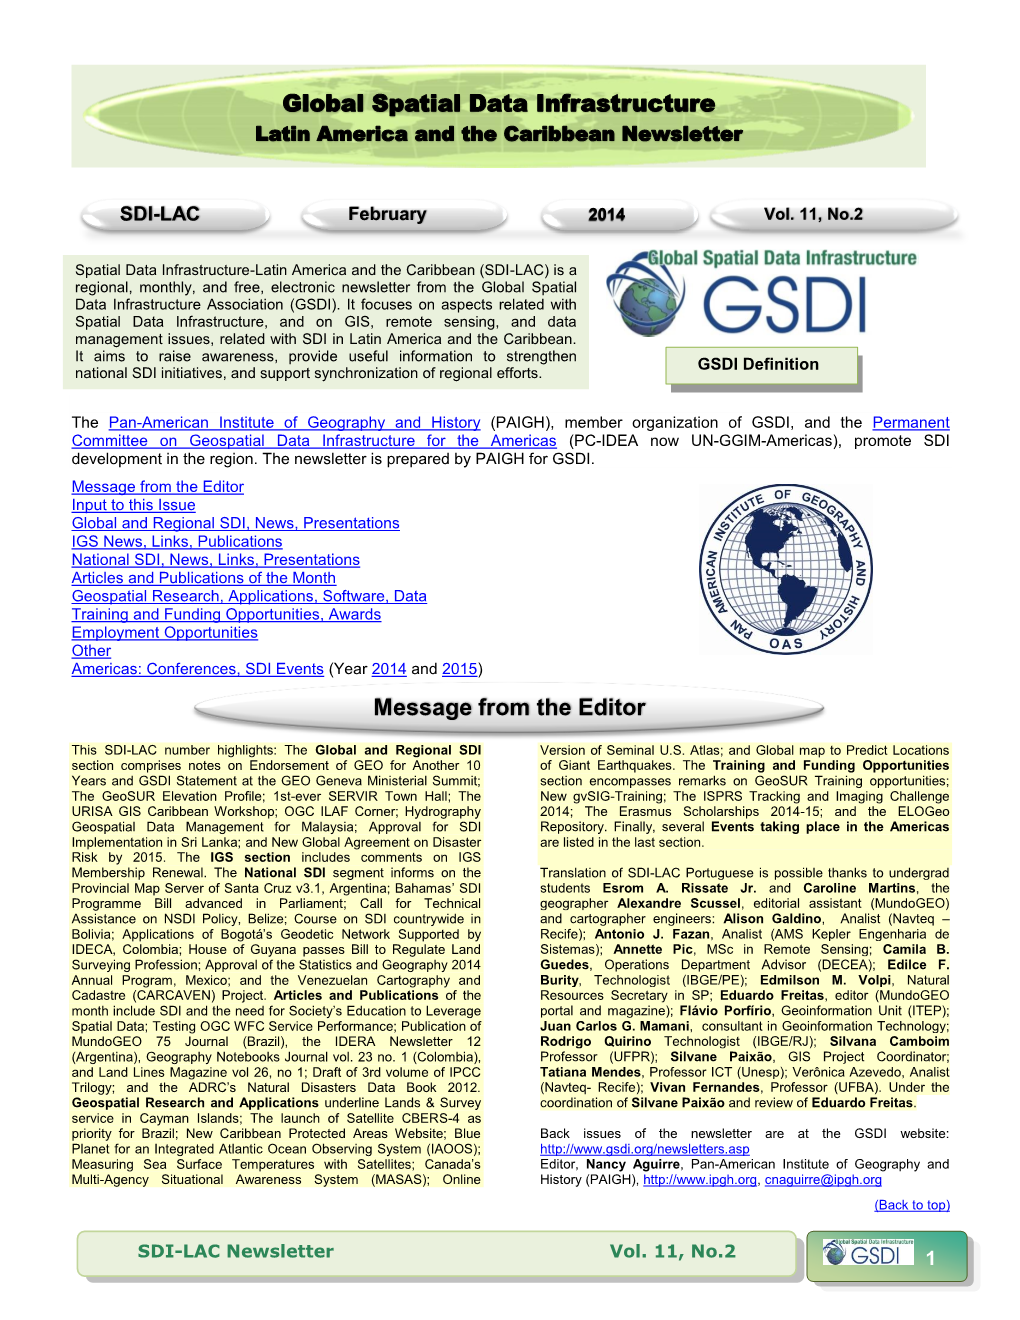 Global Spatial Data Infrastructure Message from the Editor